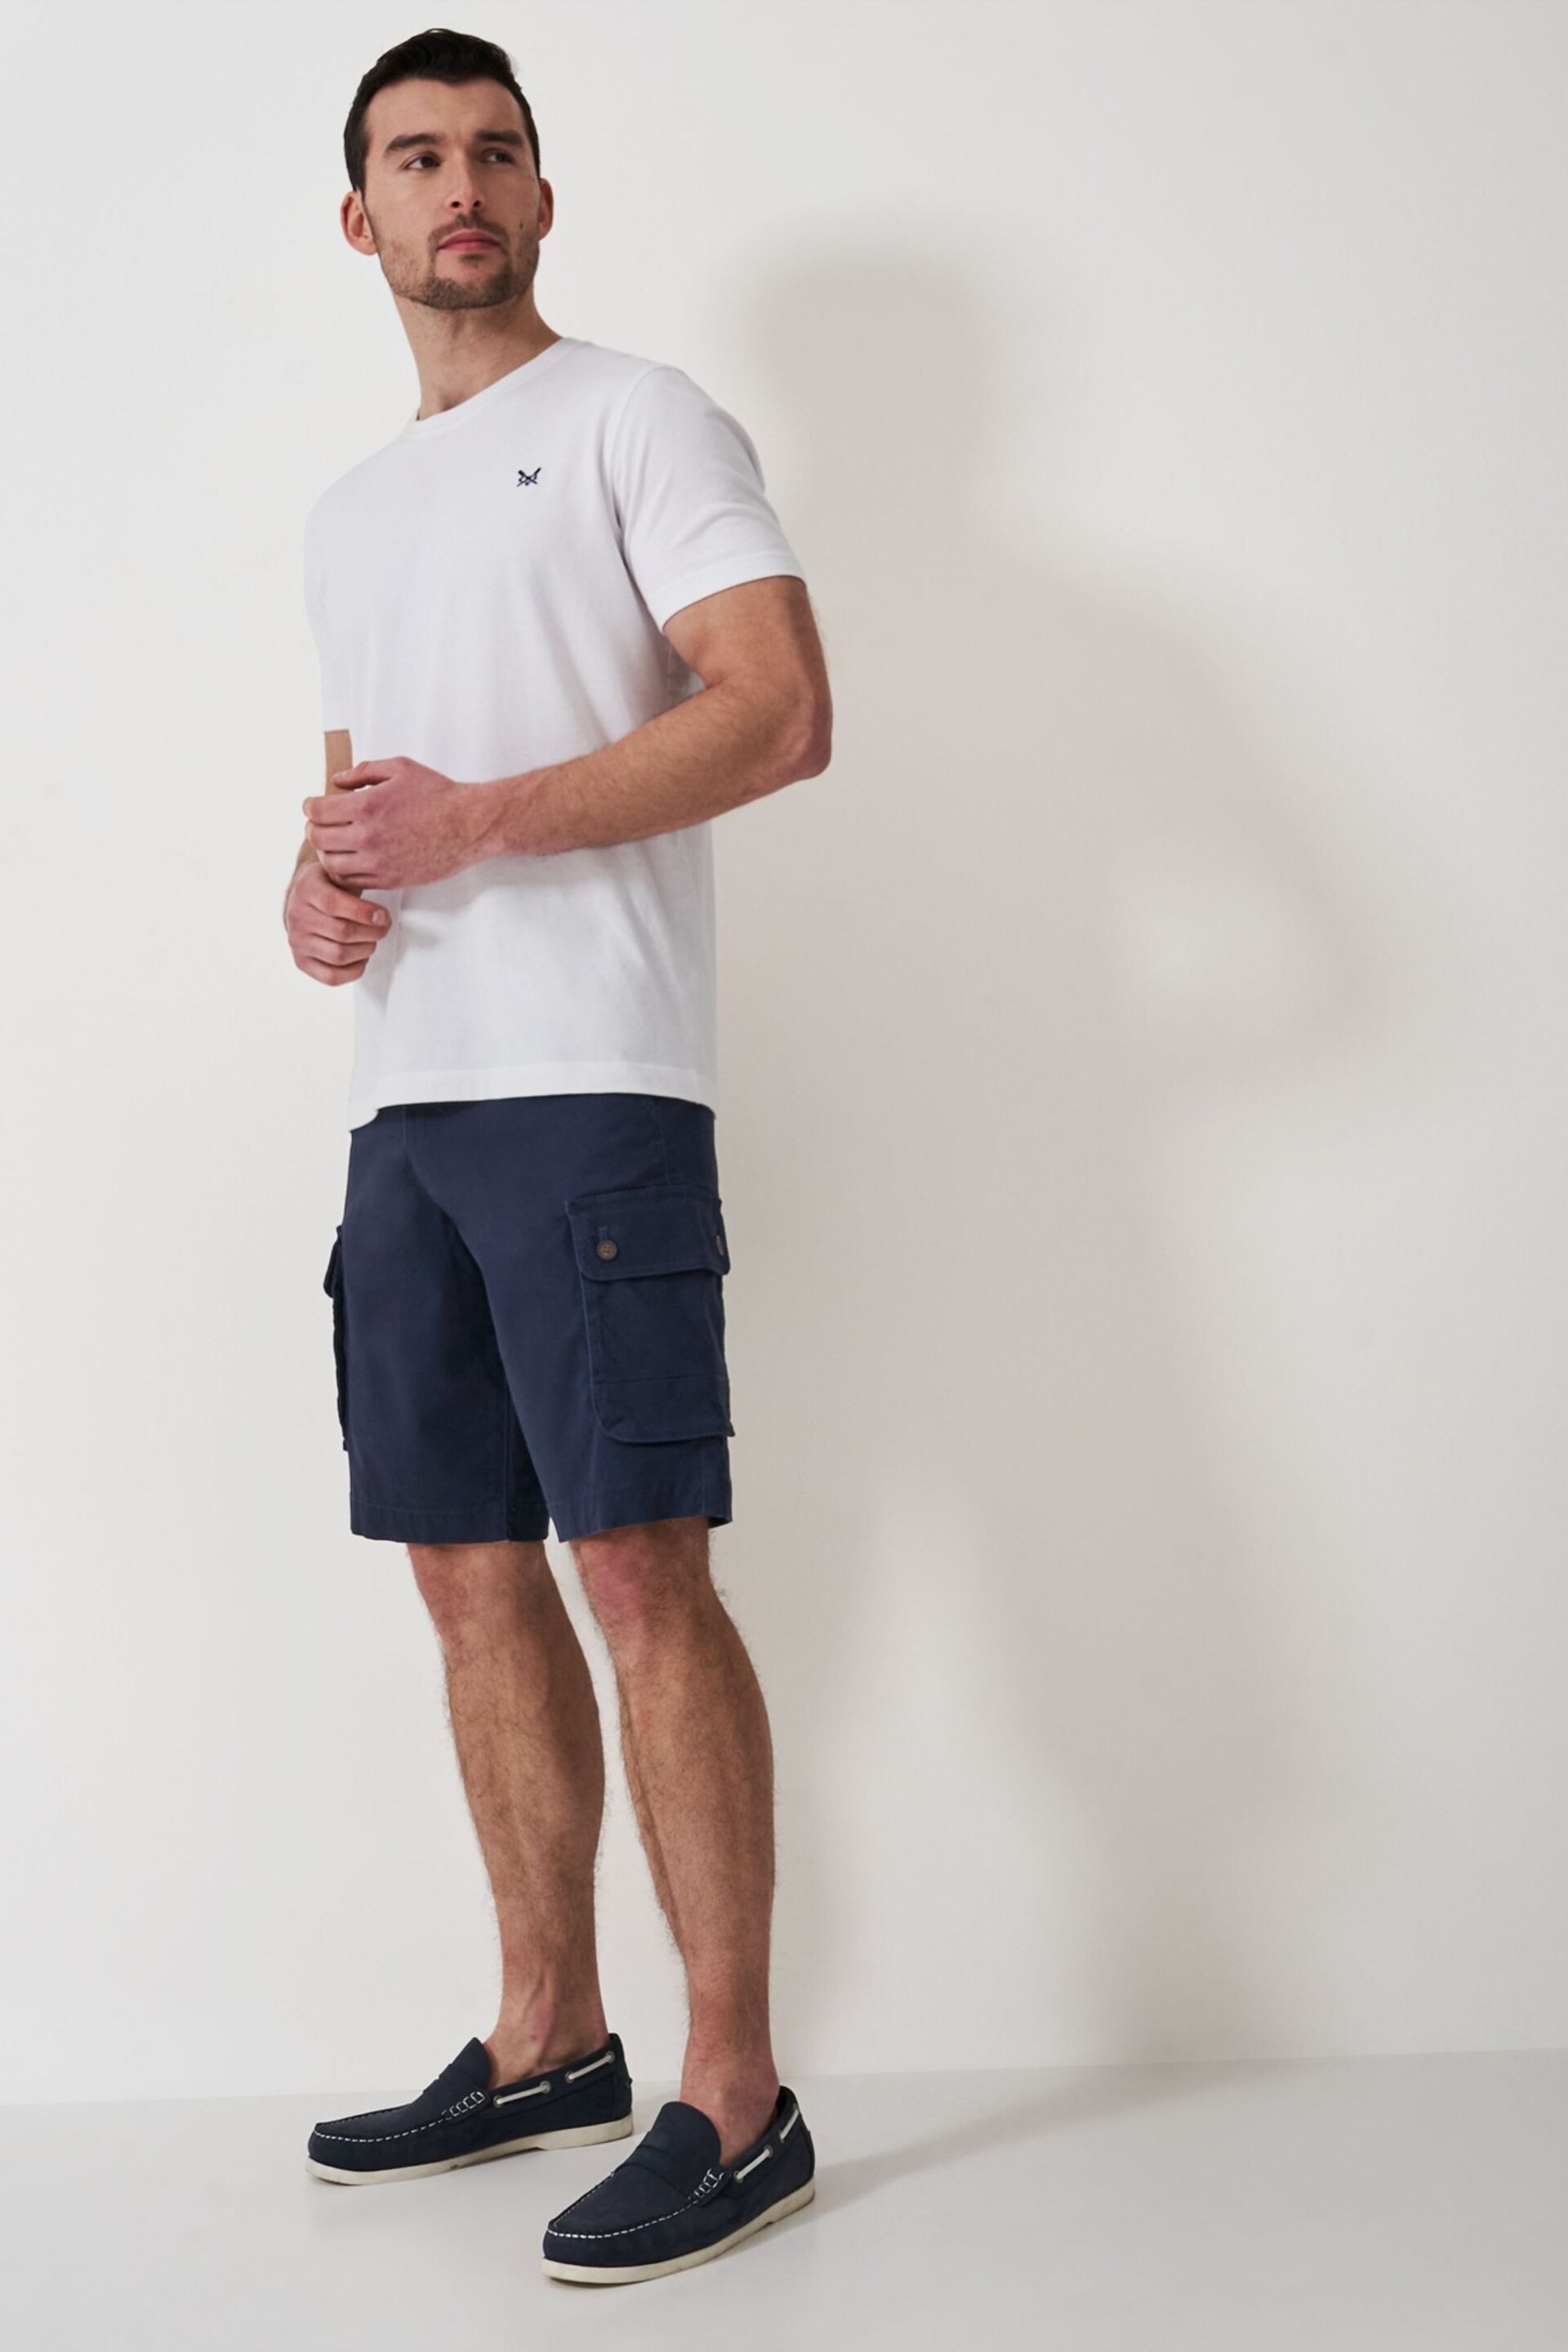 Crew Clothing Company Blue Cotton Classic Casual Shorts - Image 1 of 5